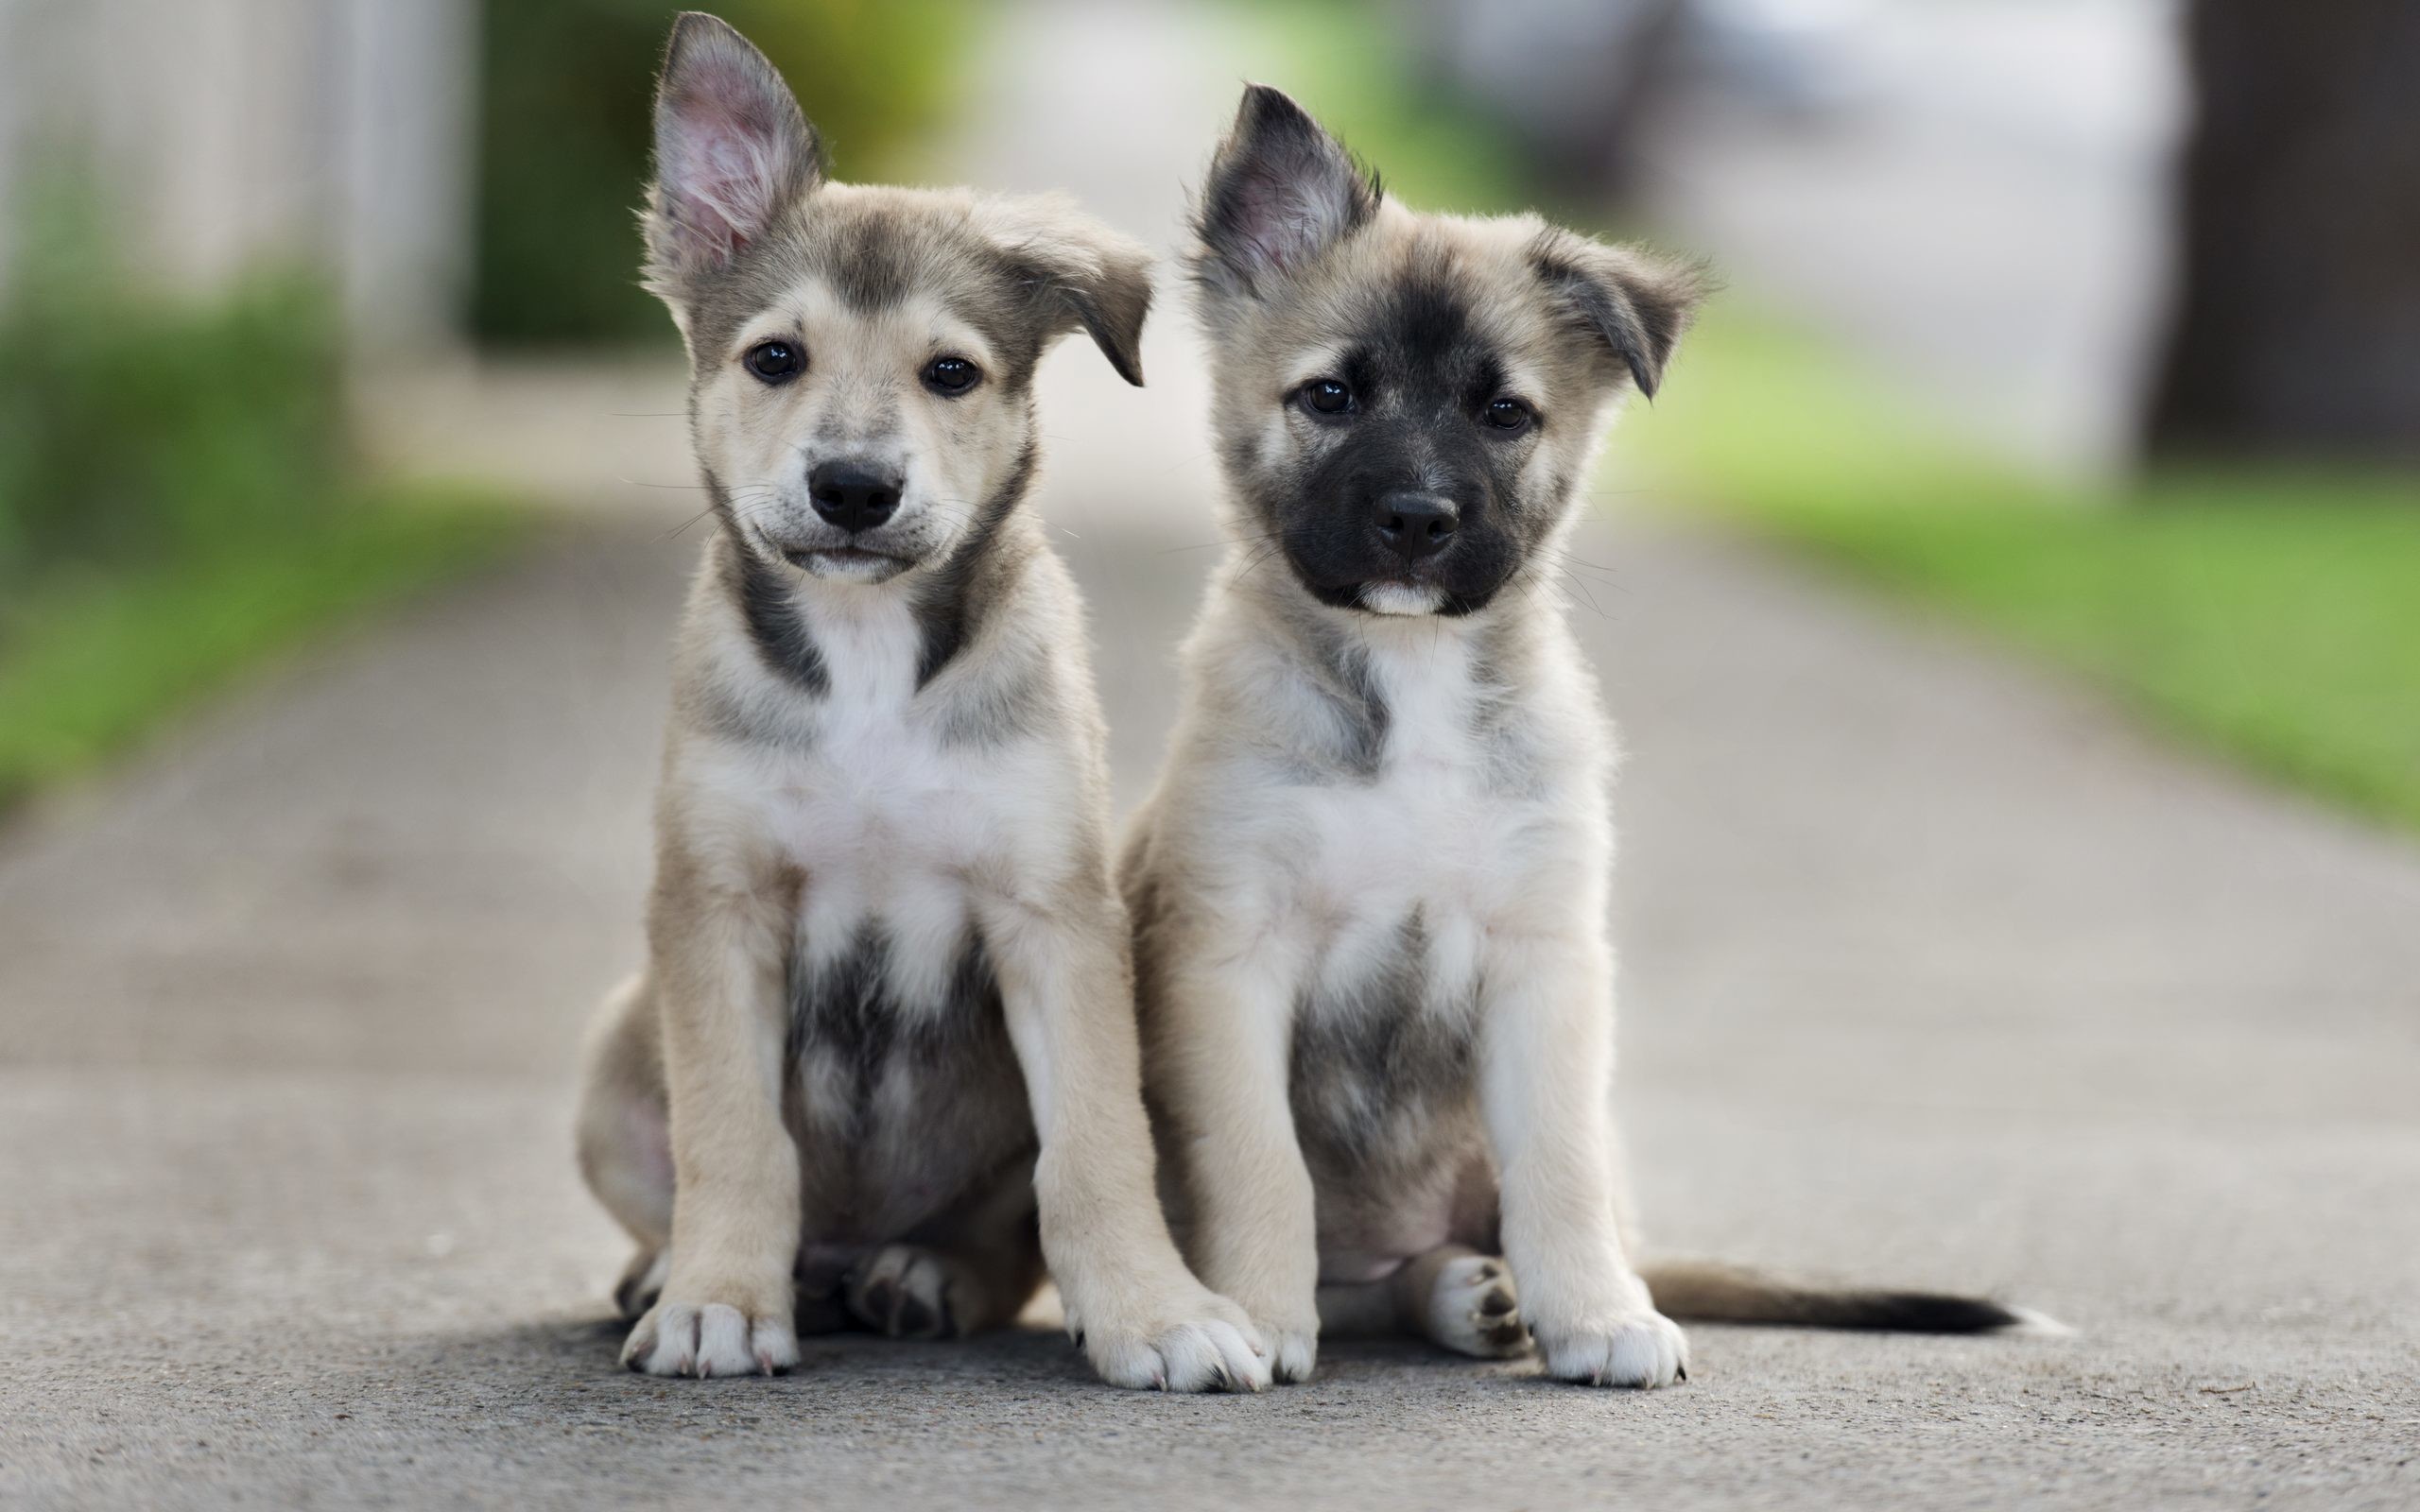 Cute Puppies Wallpaper HD Download For Desktop and Mobile